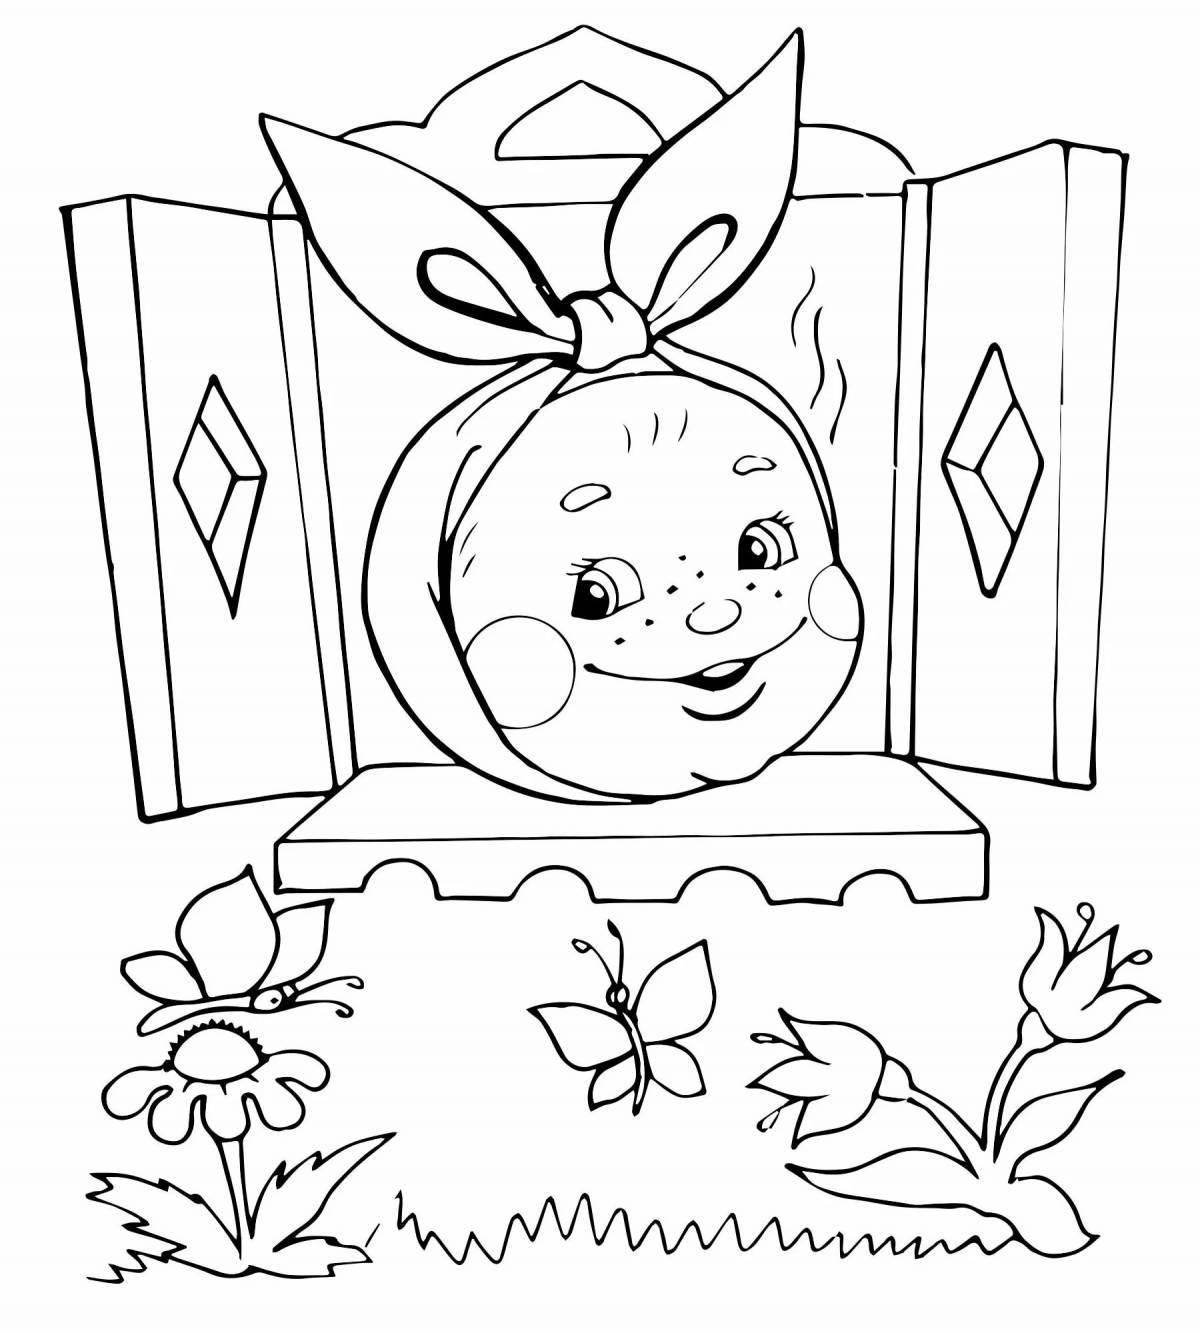 Mystical fairy tale coloring pages for kids